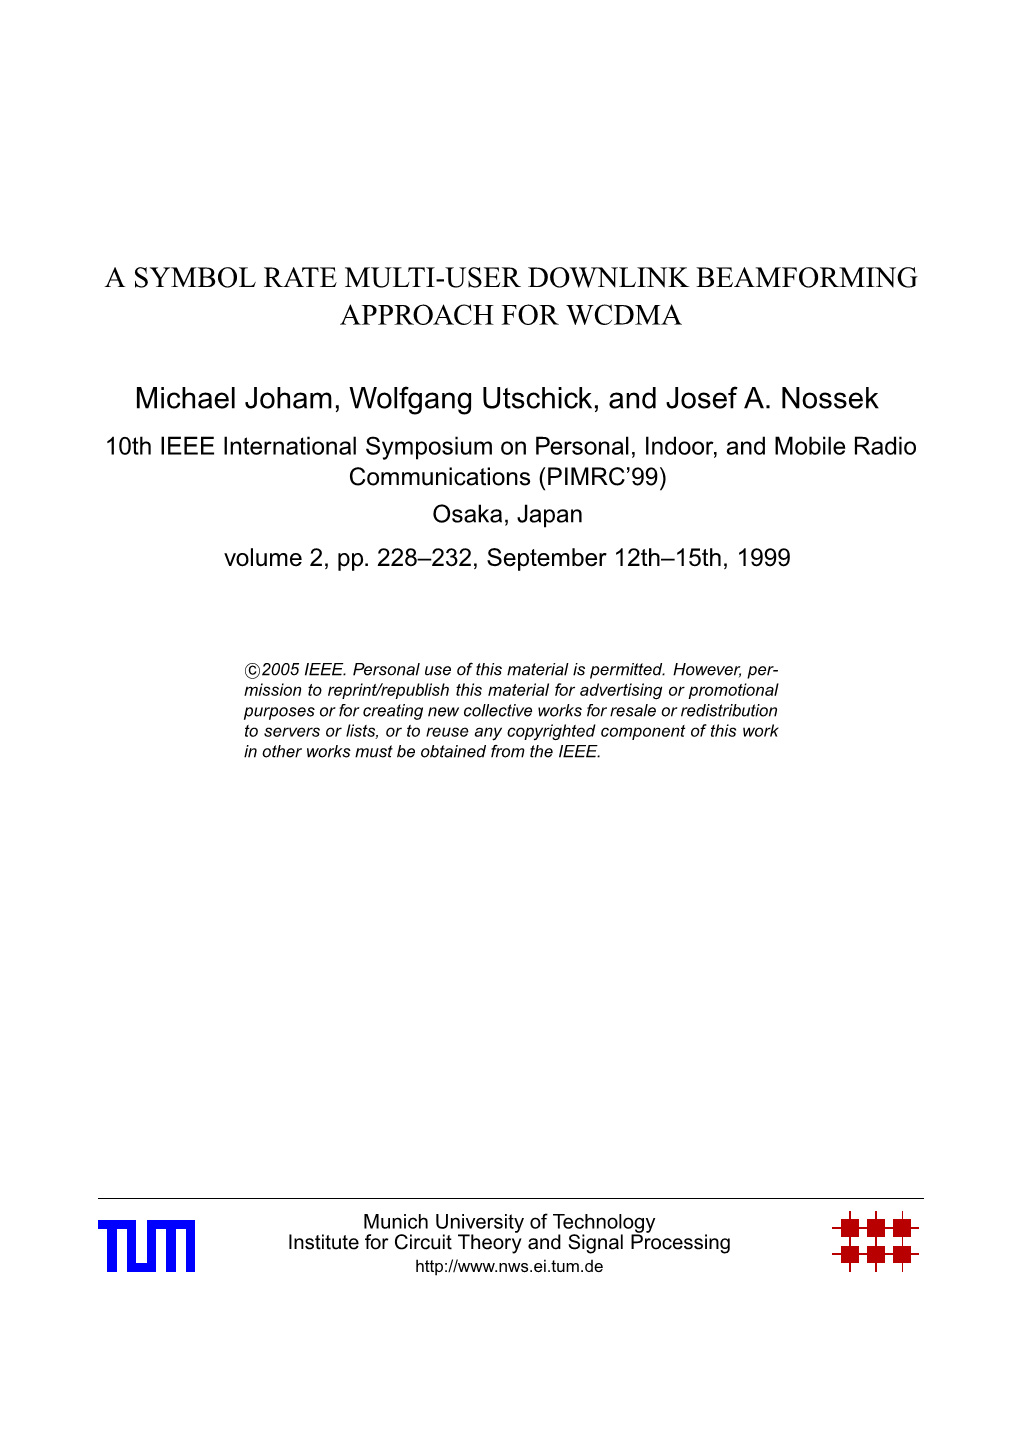 A Symbol Rate Multi-User Downlink Beamforming Approach for Wcdma